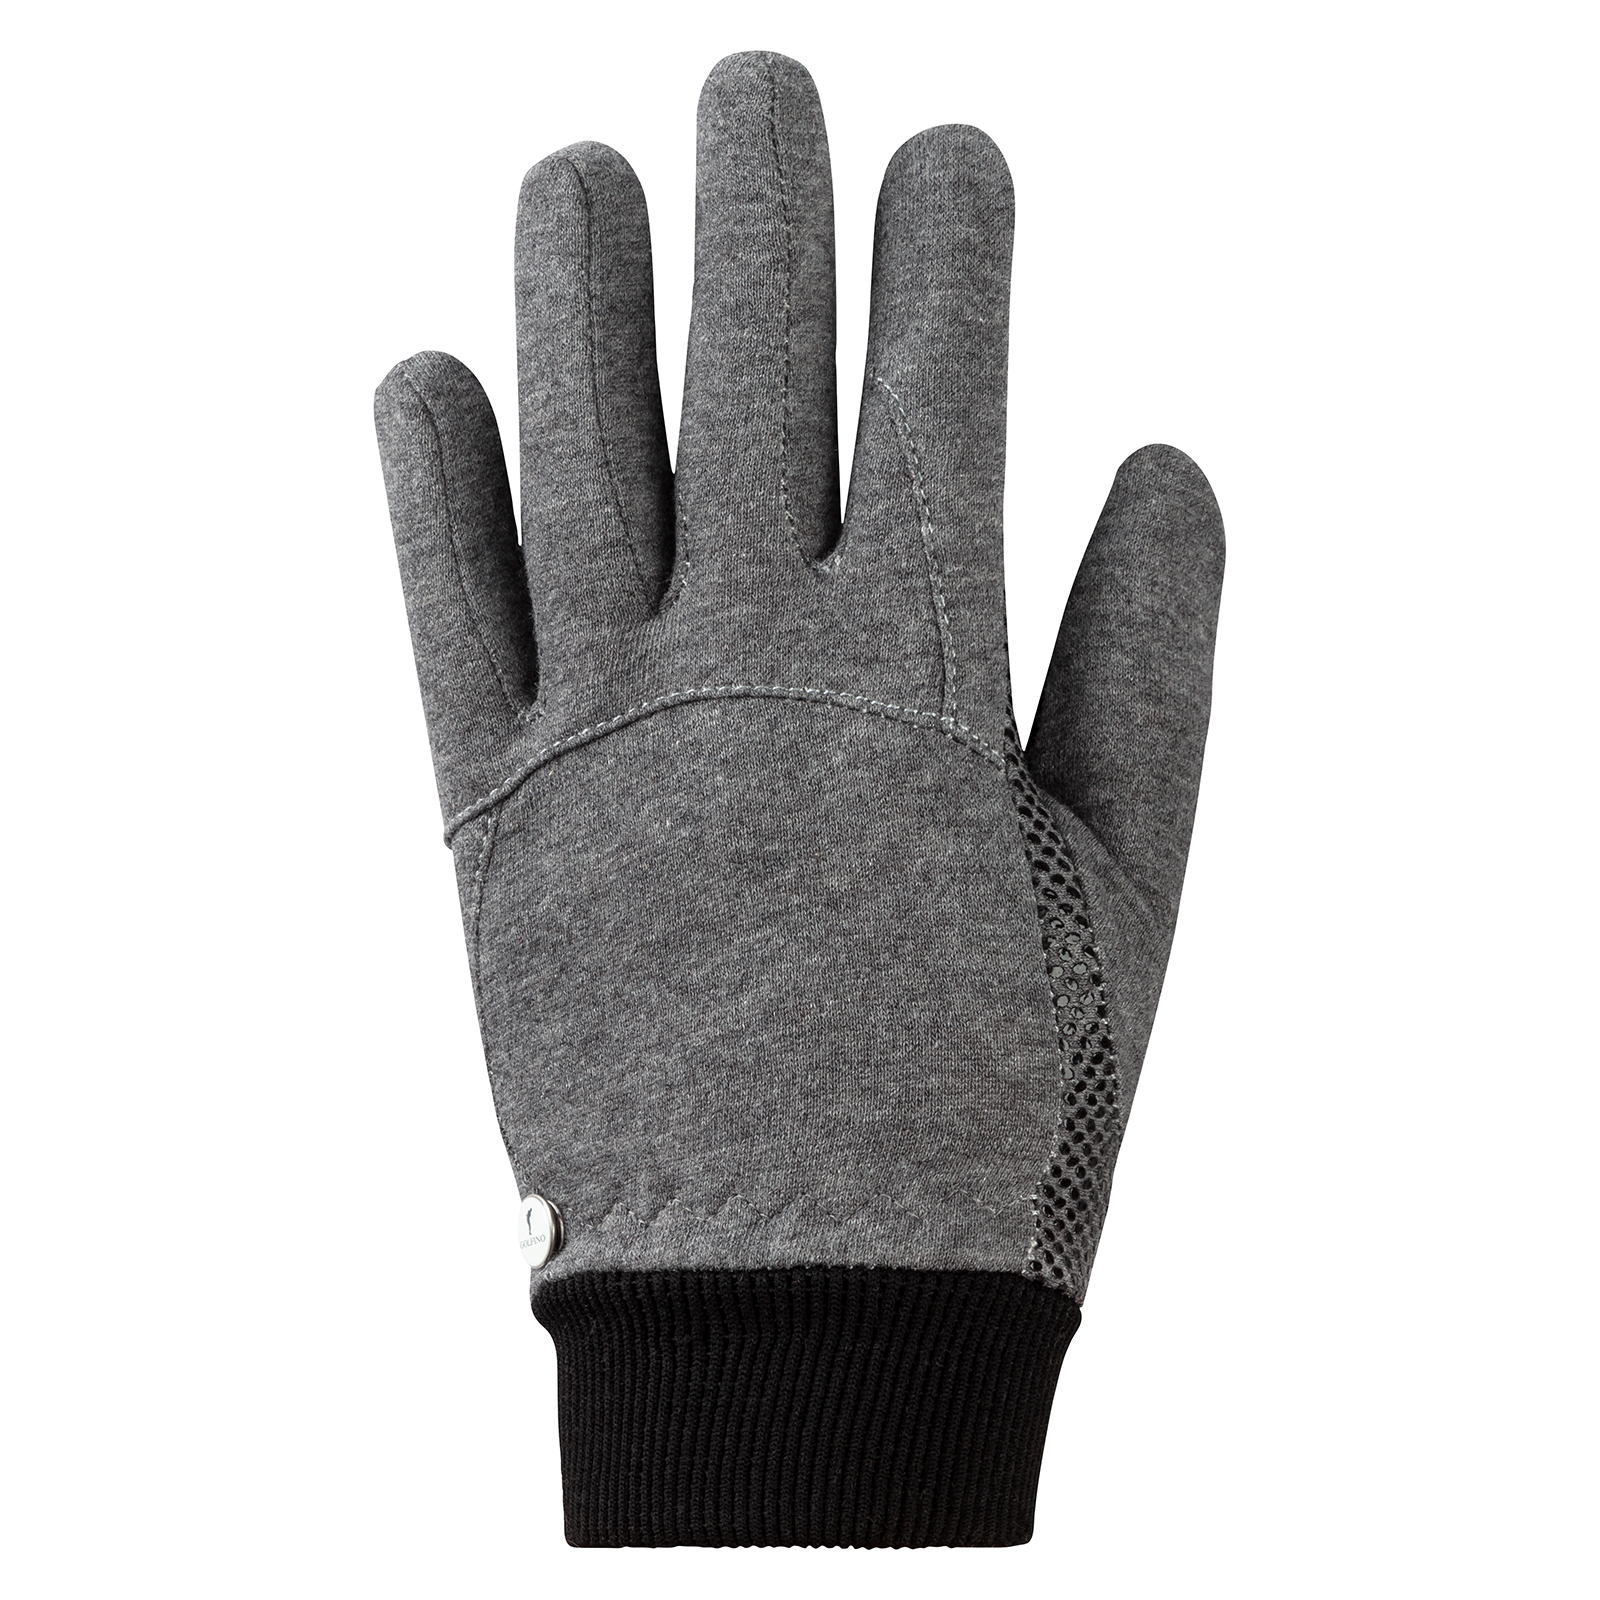 Men's warm functional gloves with wind protection